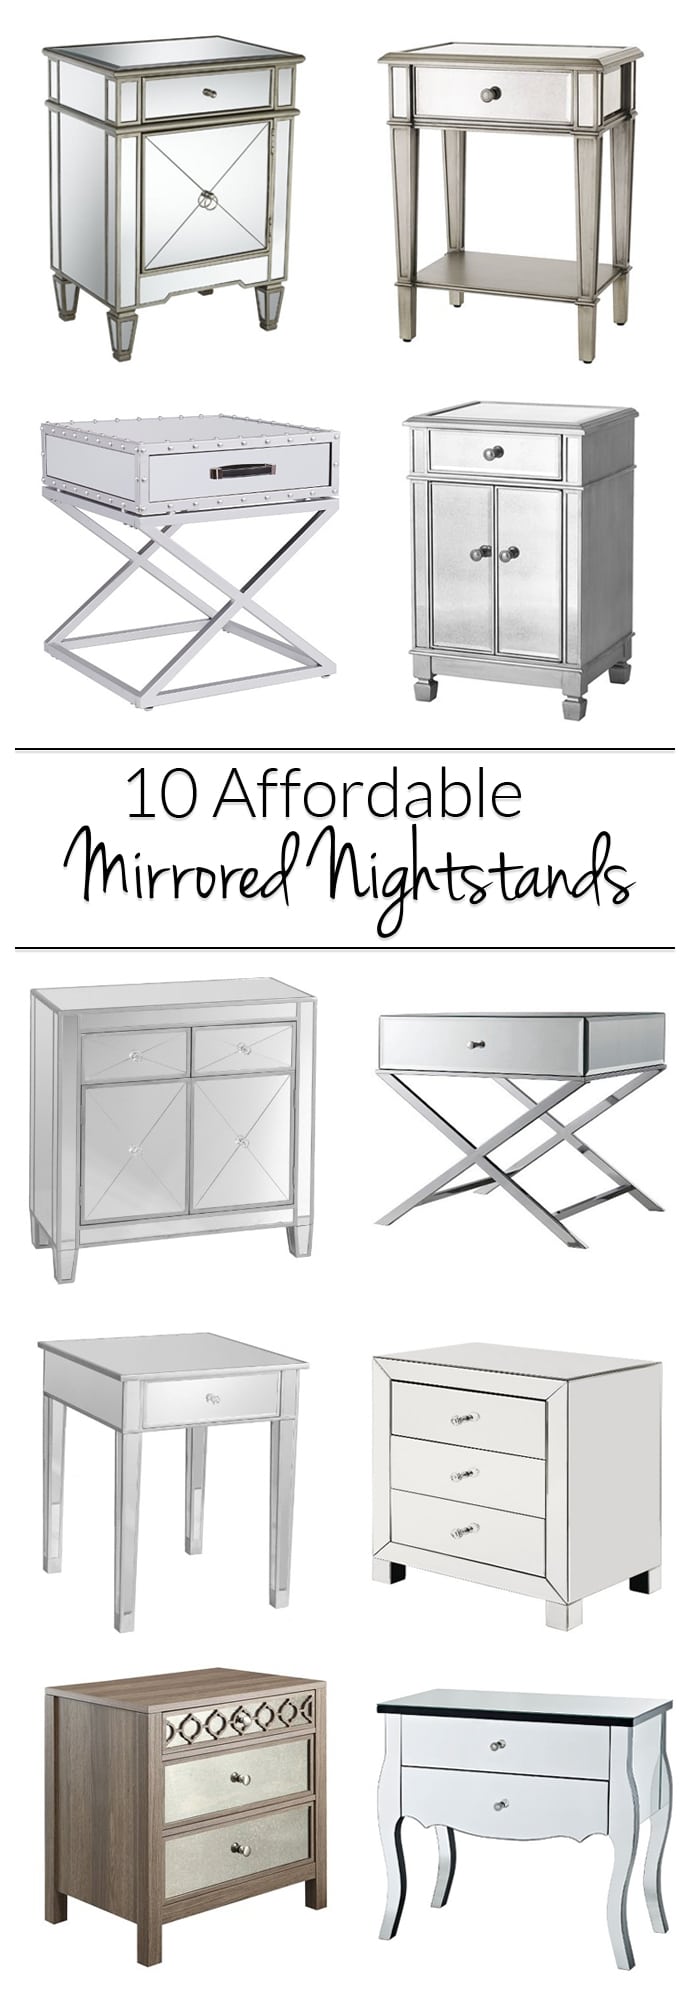 Mirrored Nightstands - 10 Cheap Options - Polished Habitat